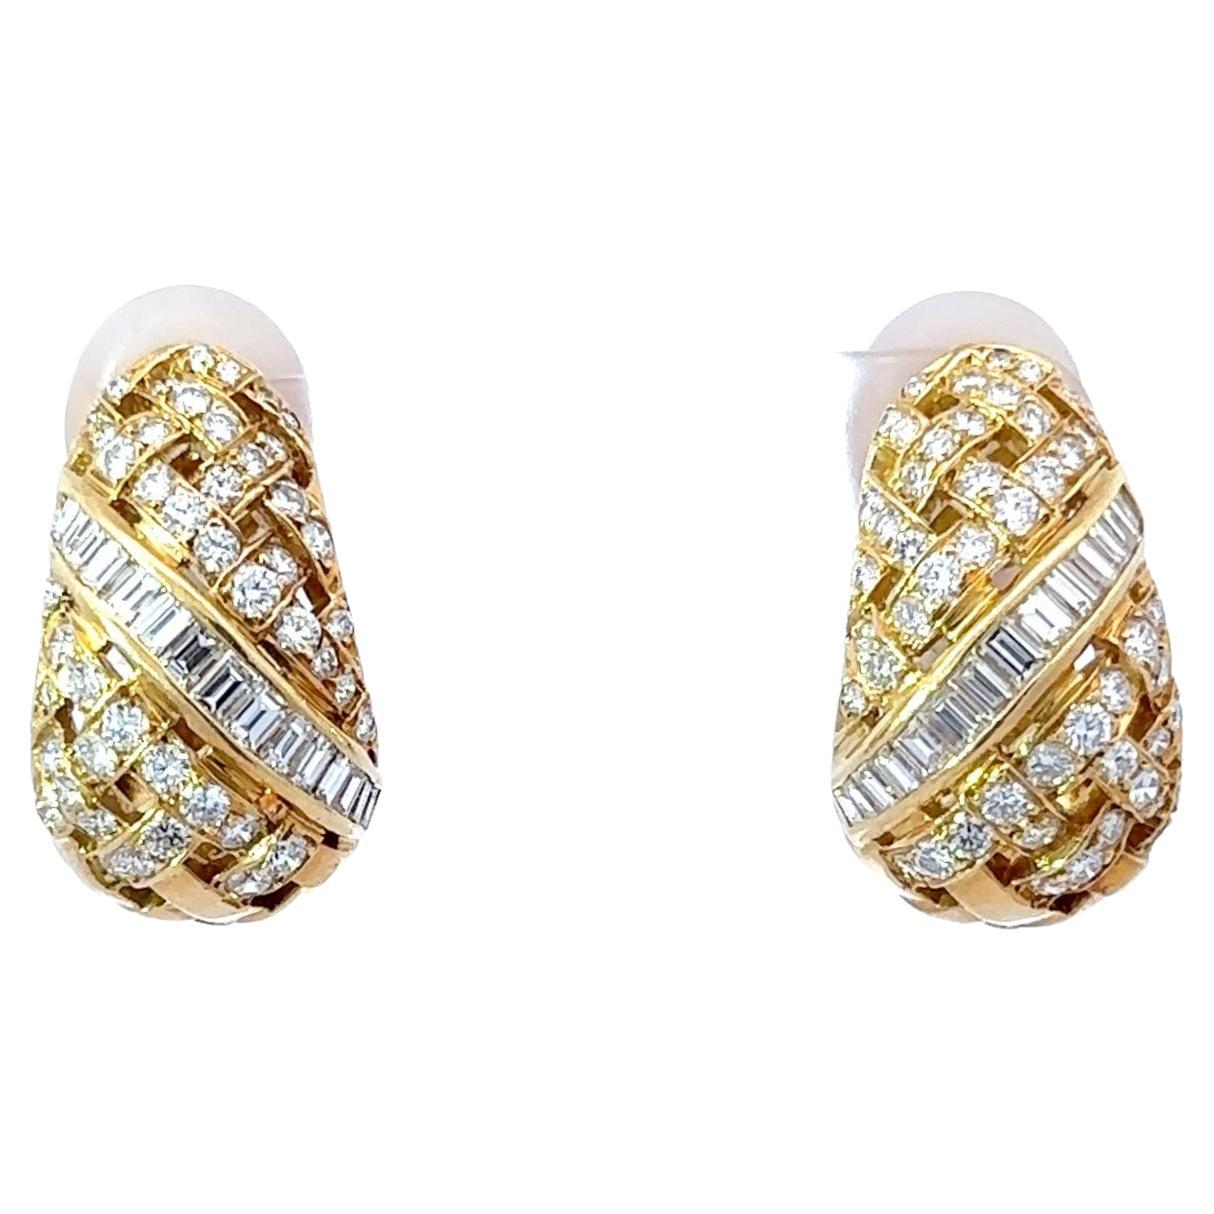 Tiffany and Co. Gold and Diamond Earrings For Sale